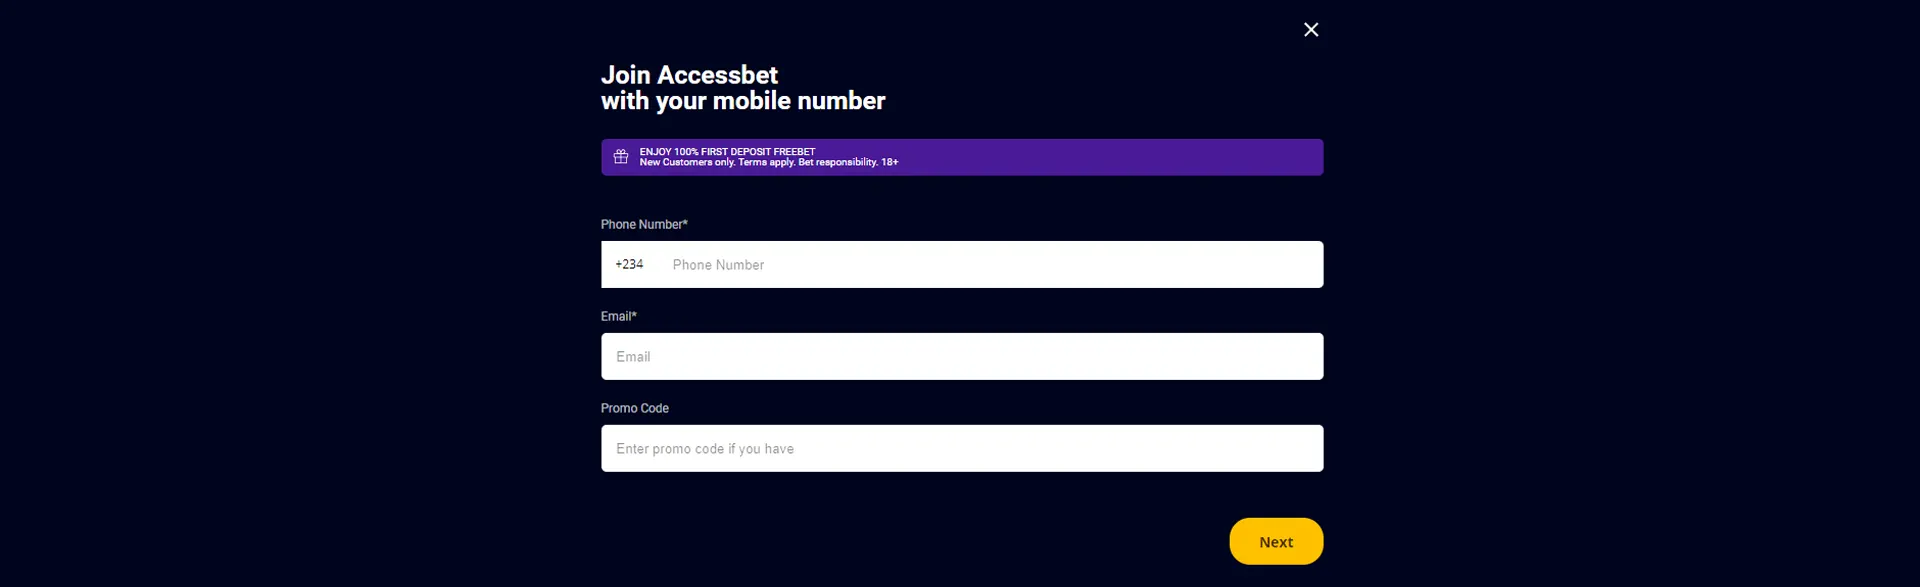 Page with registration form on AccessBET.